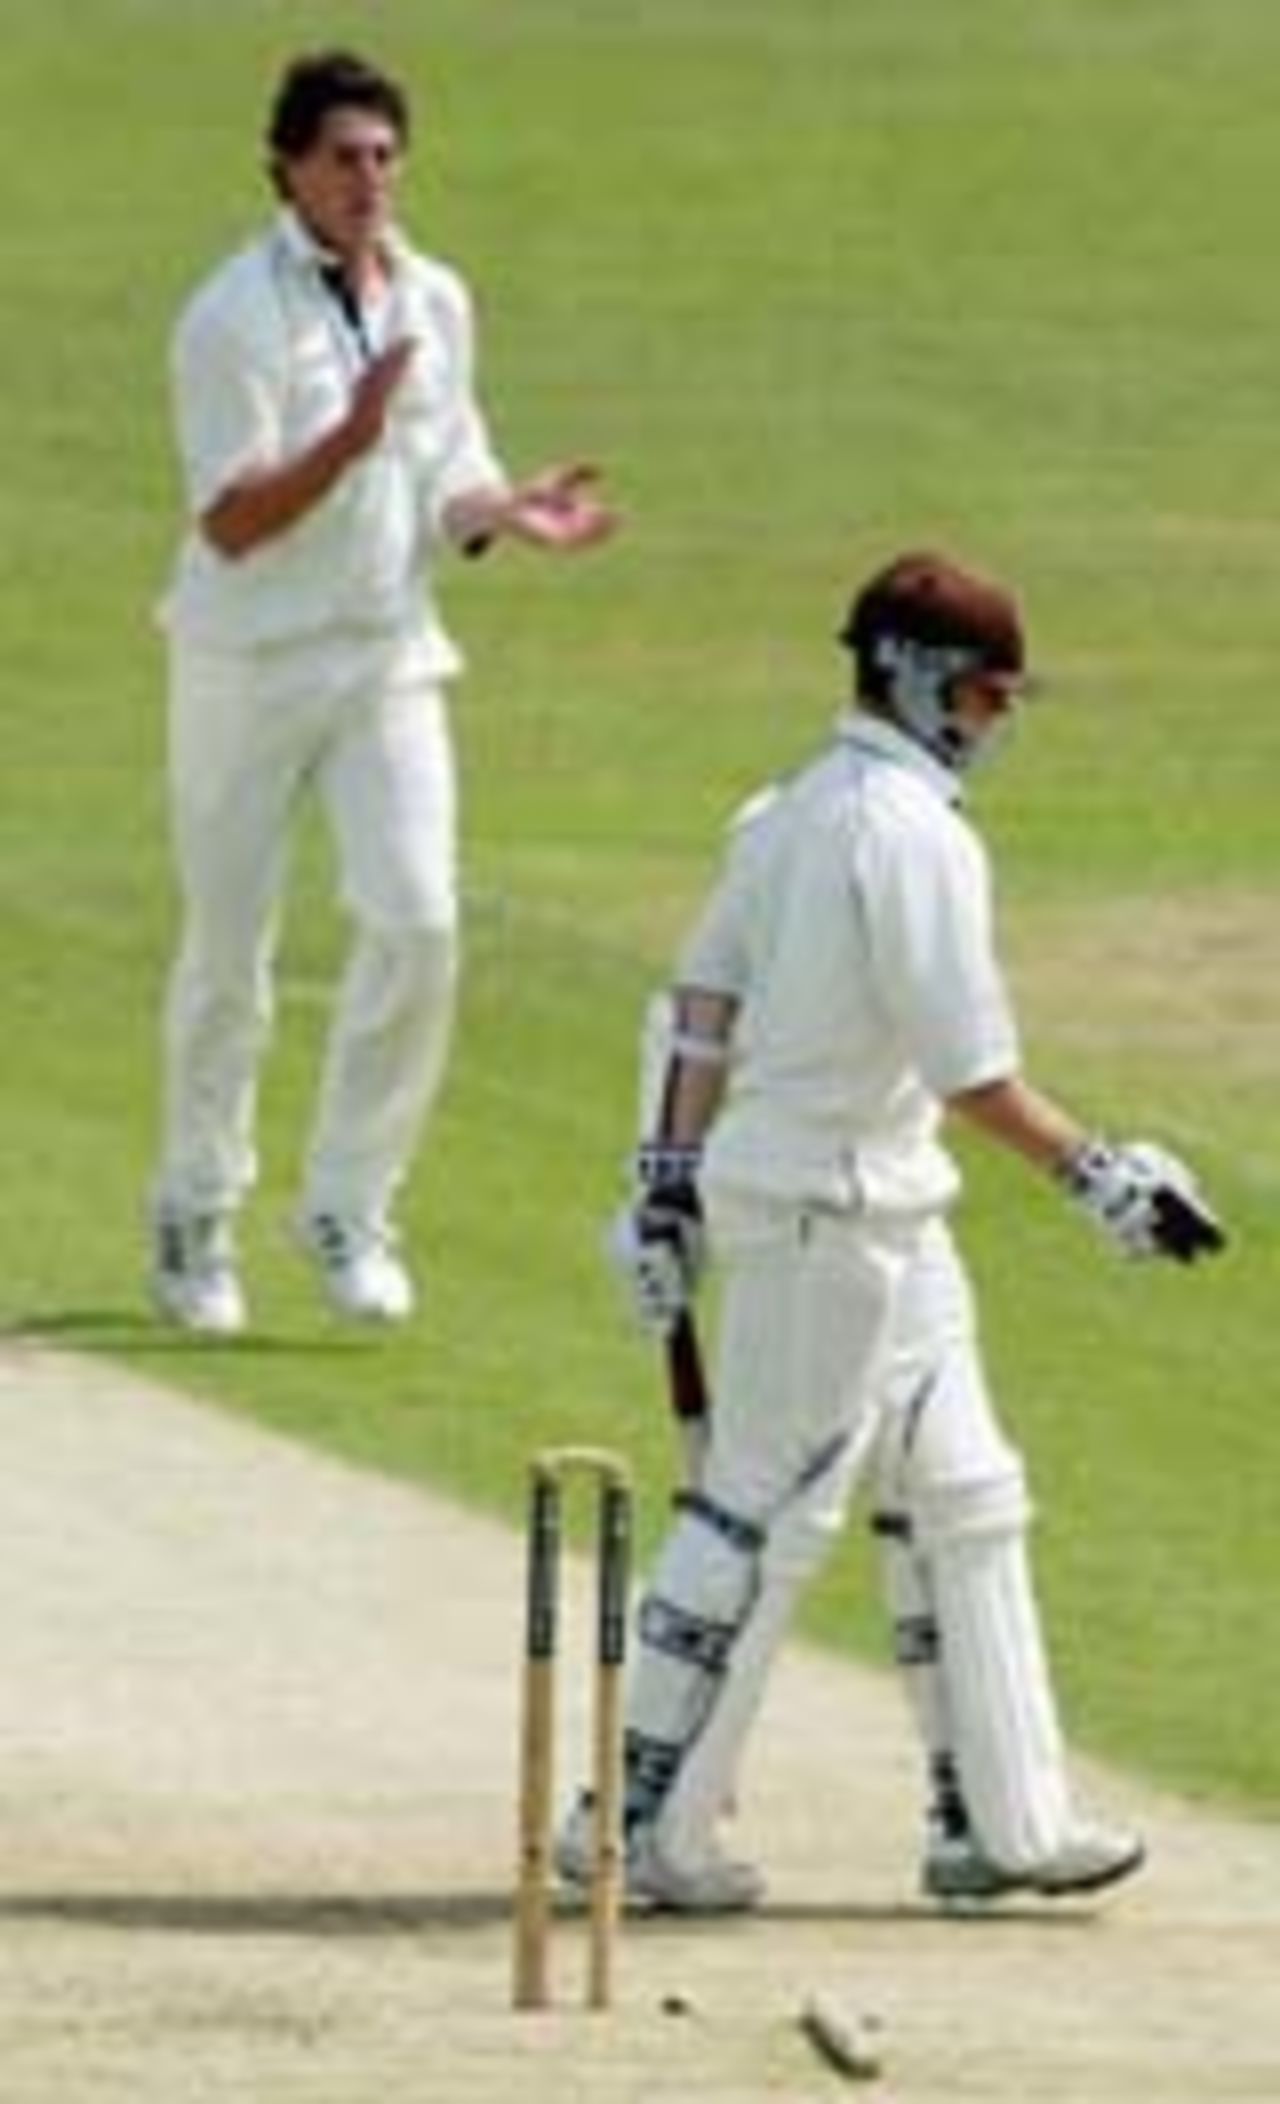 Jonathan Batty is bowled by a delighted Jon Lewis, Gloucestershire v Surrey, Bristol, June 2, 2004